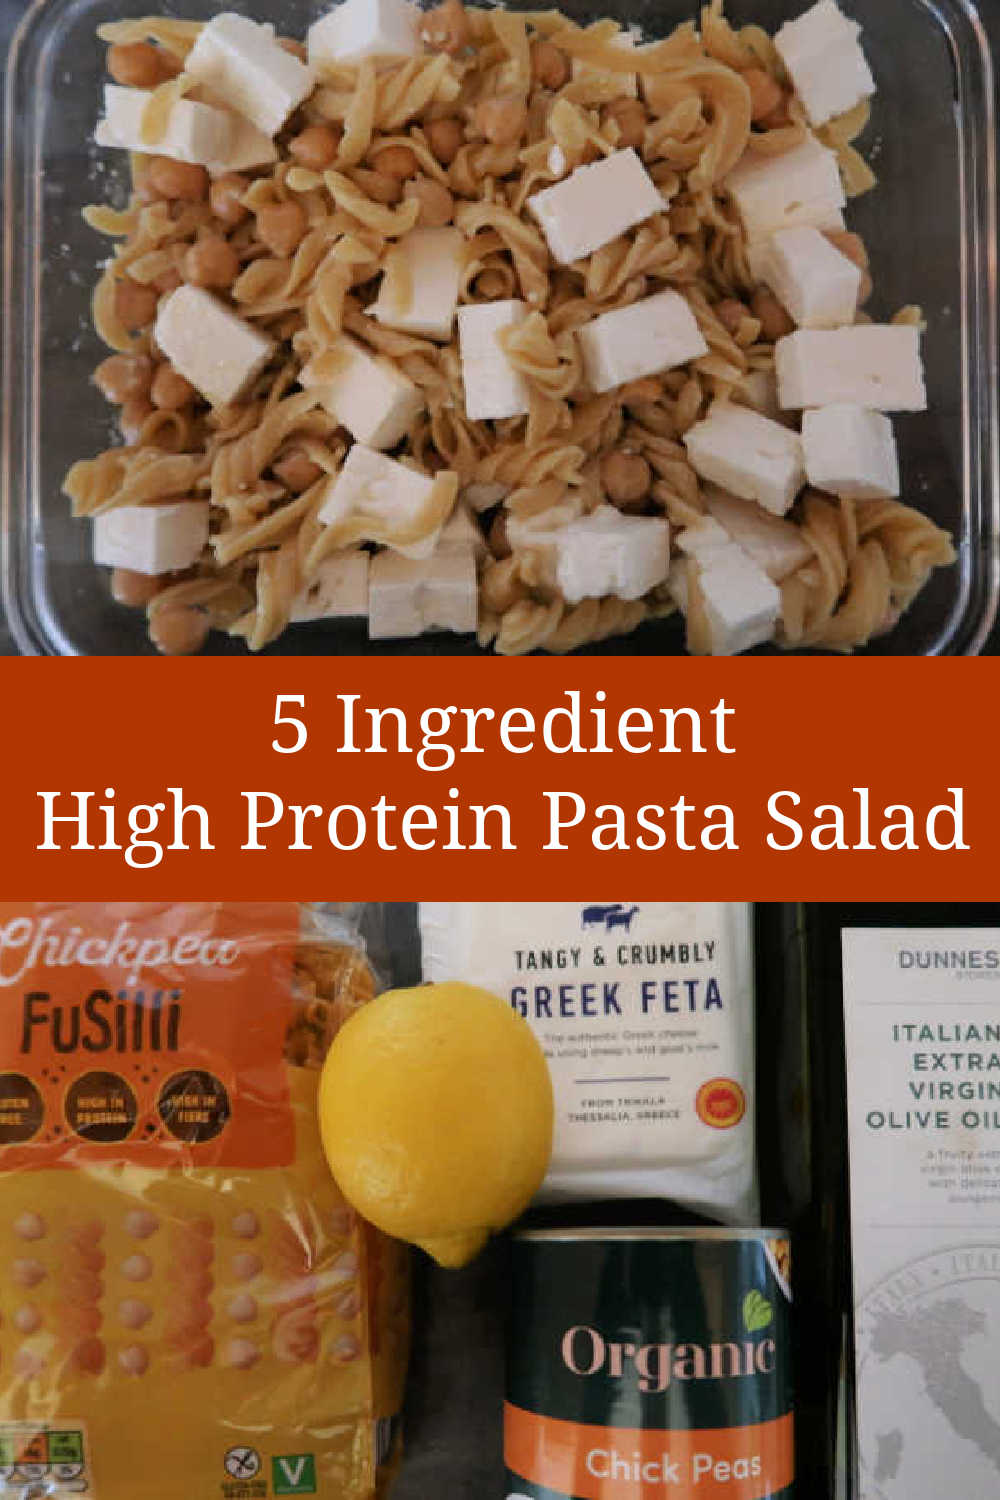 High Protein Pasta Salad Recipe - How to make an easy, healthy protein packed veggie meal with chickpea pasta - super quick meal prep idea with Mediterranean Diet flavors.